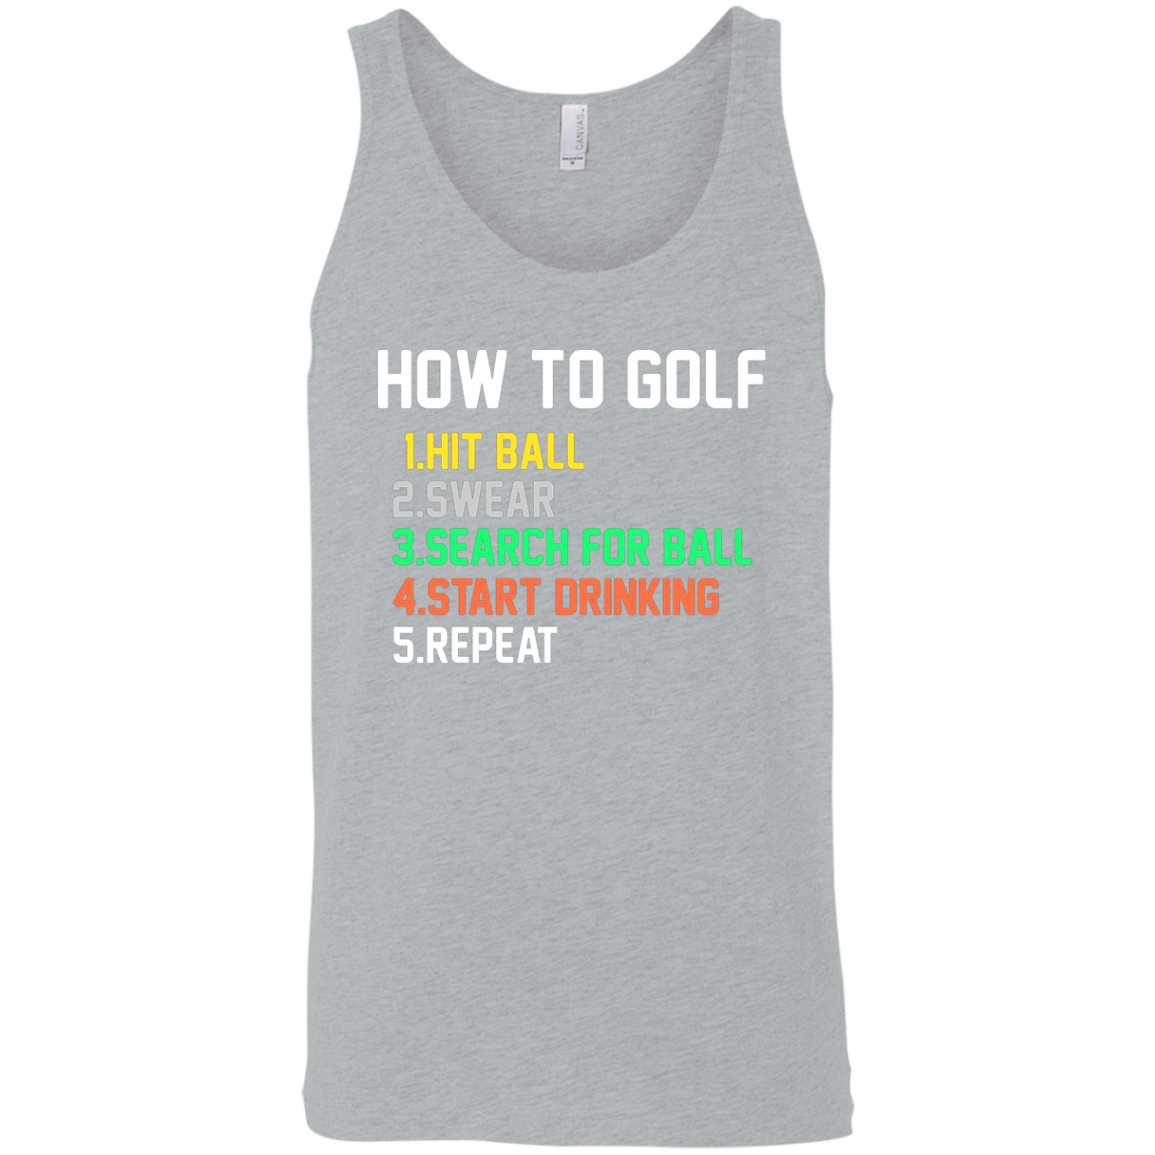 How To Golf Tank Top Apparel - The Beer Lodge